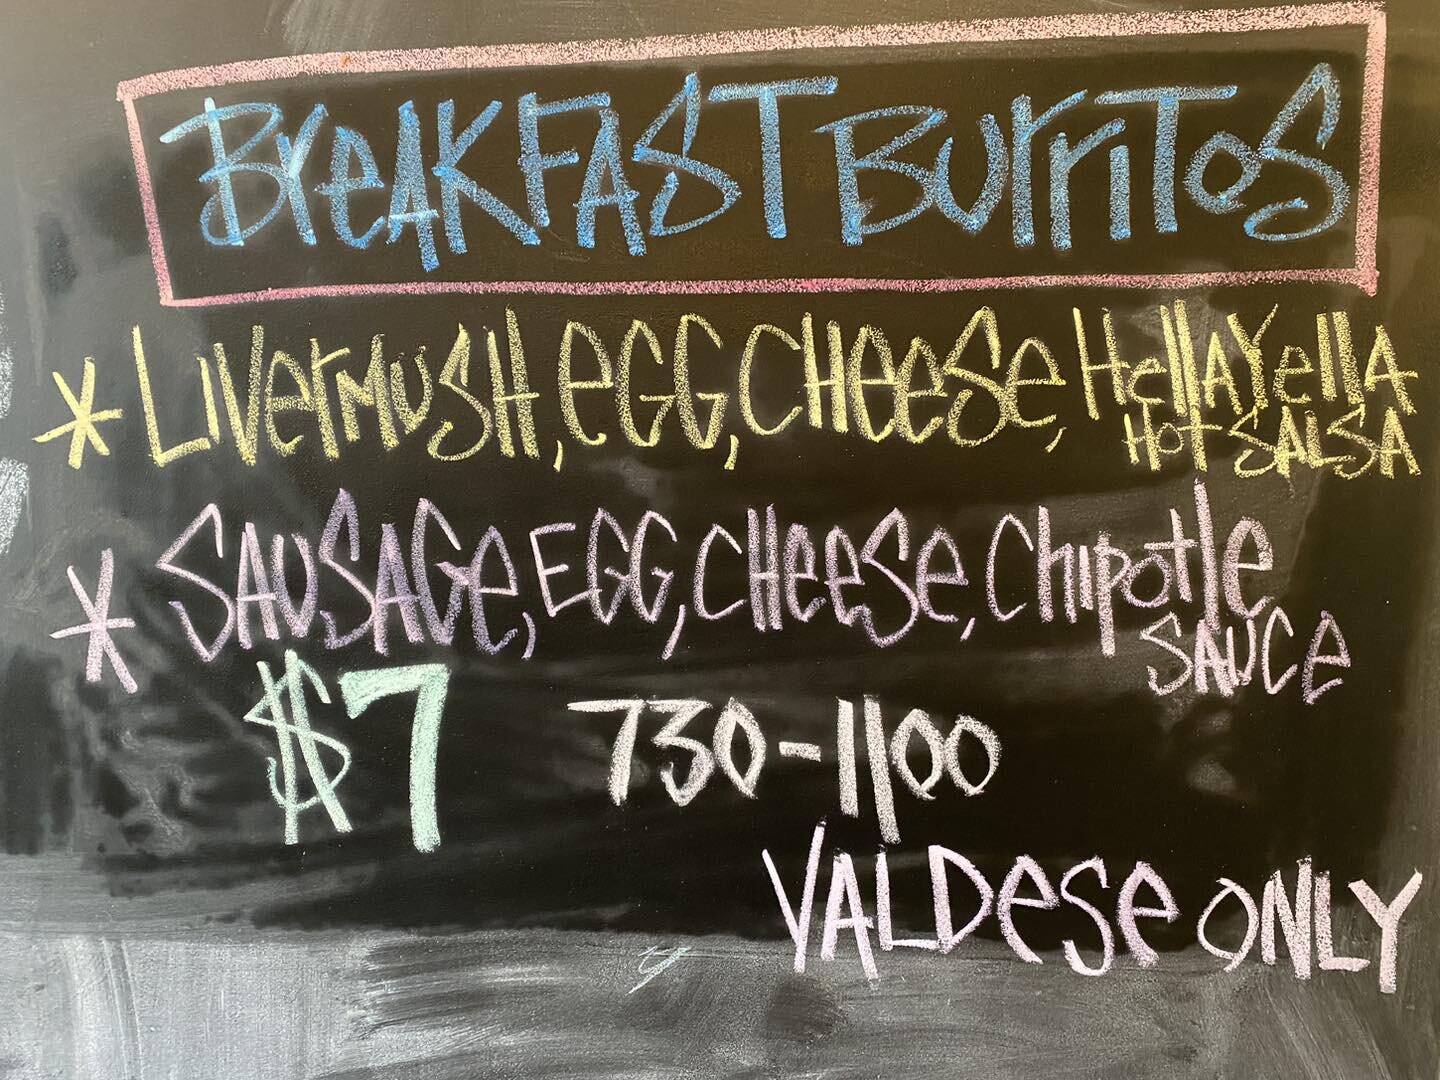 (Drum roll please)

Breakfast Burritos this morning in Valdese!!!!
730-1100 or until we sell out!!!

See you sooooooon!!!!!